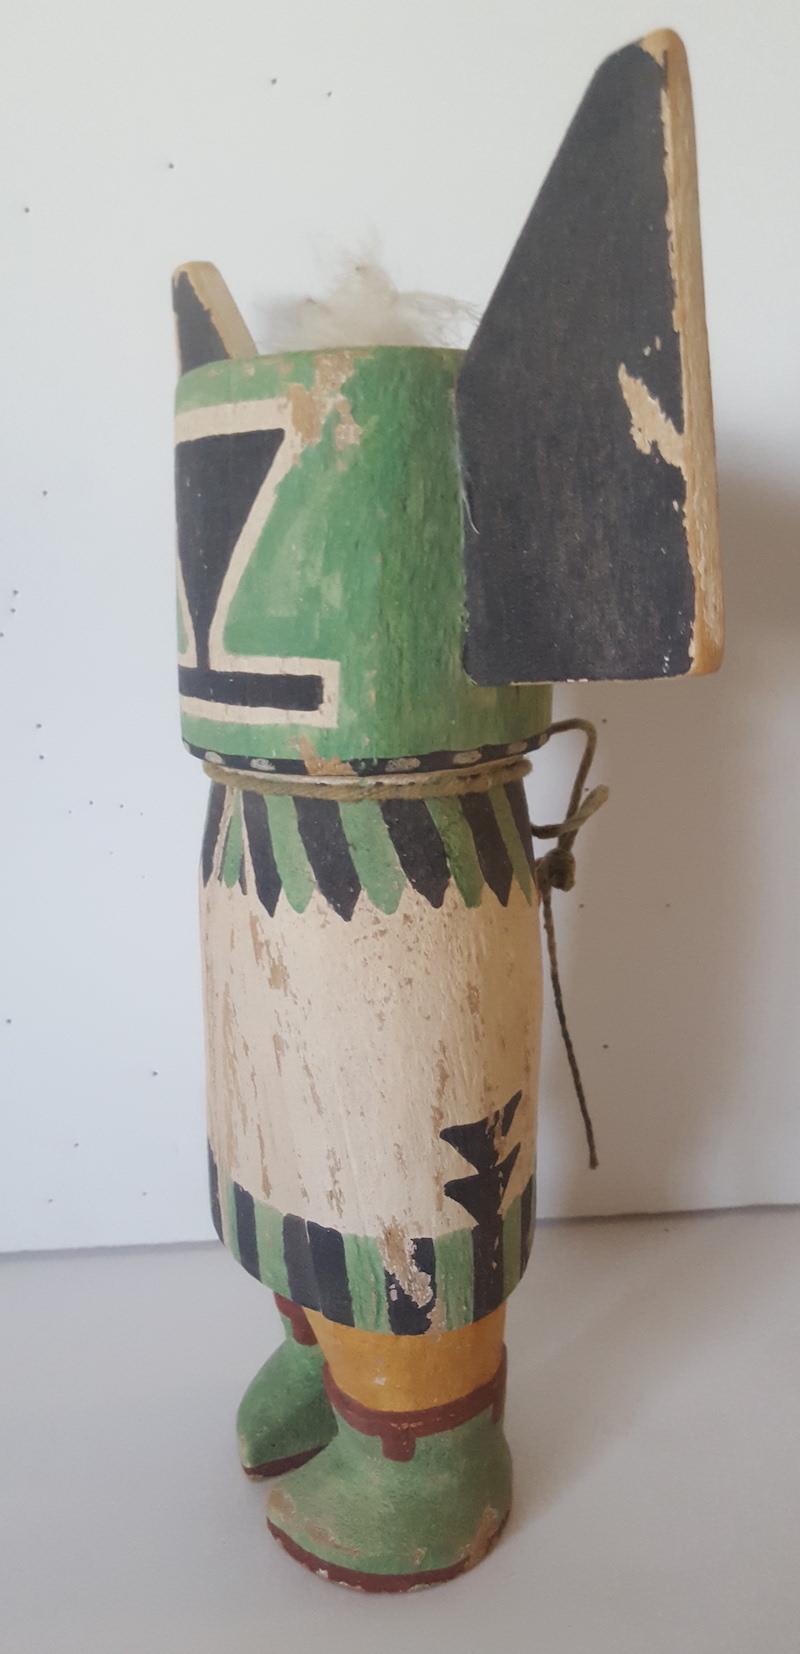 This Hopi, traditional style Kachina Doll was hand-carved and hand-painted circa 1960 by a master maker of replica, as well as more original versions of classic, vintage Kachinas. It is carved of traditional cottonwood and painted with the similar